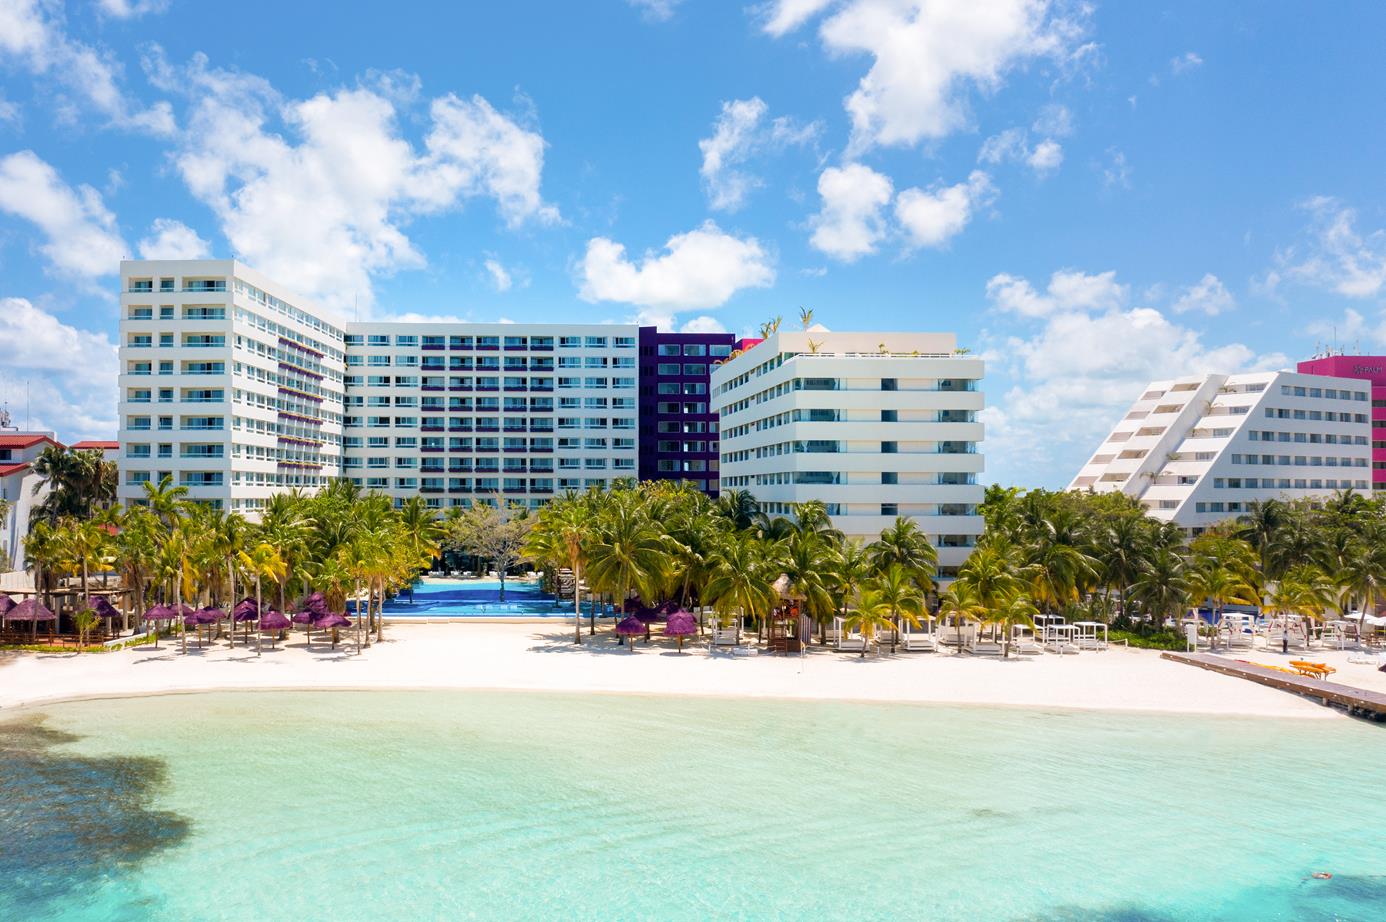 Property image of The Sens Cancun